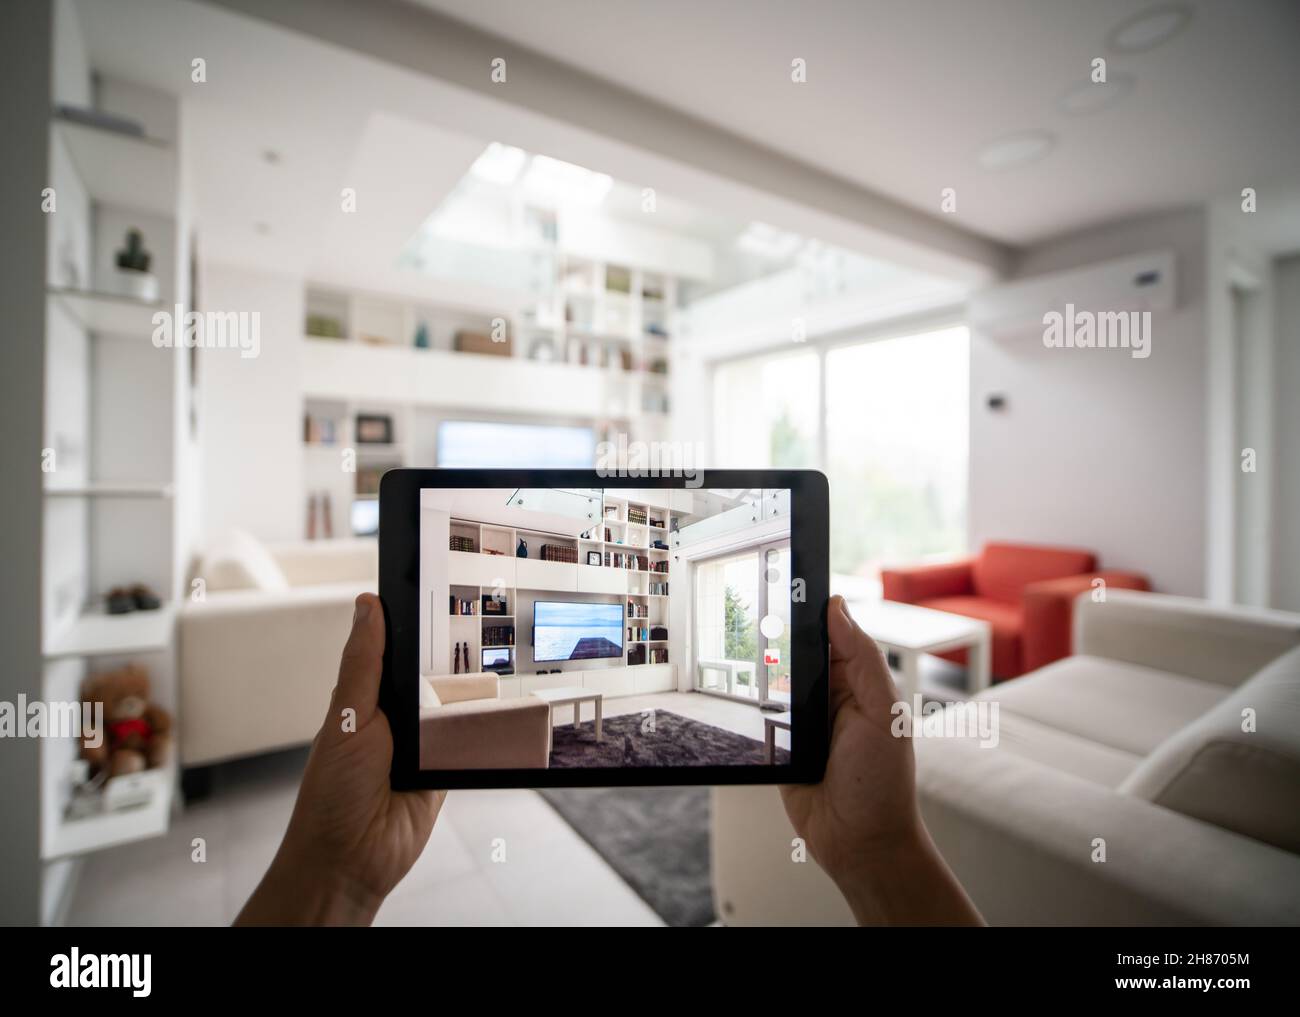 Decorating Apartment with Augmented Reality Interior Design Software. High quality photo Stock Photo